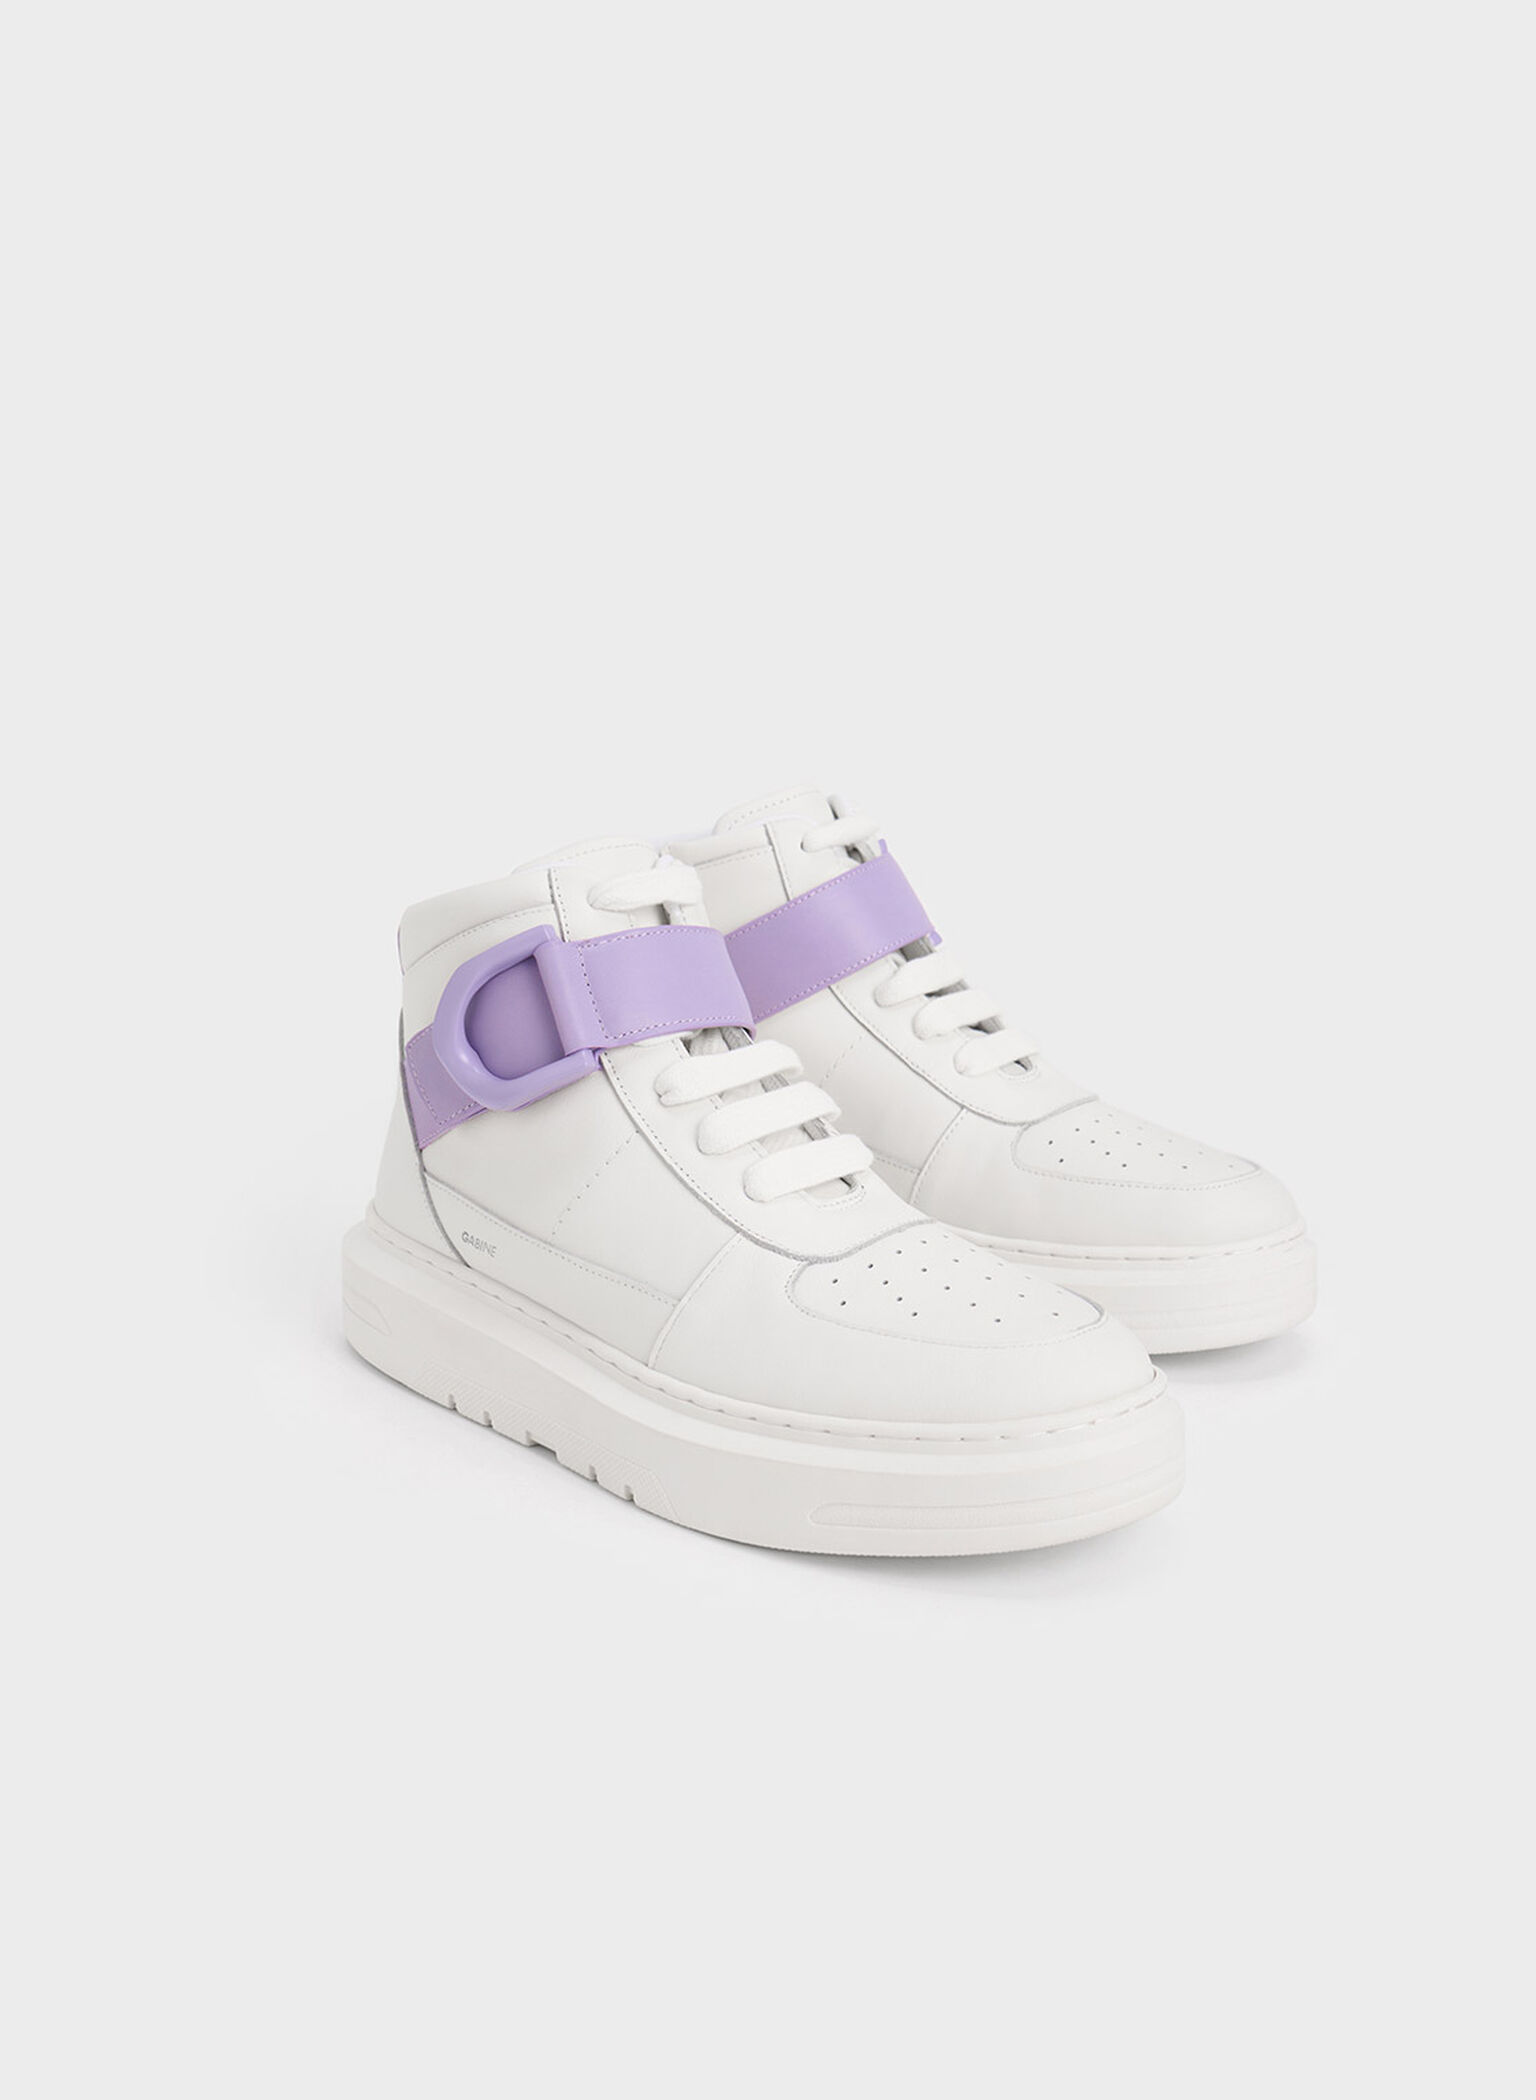 Gabine Leather High-Top Sneakers, Lilac, hi-res